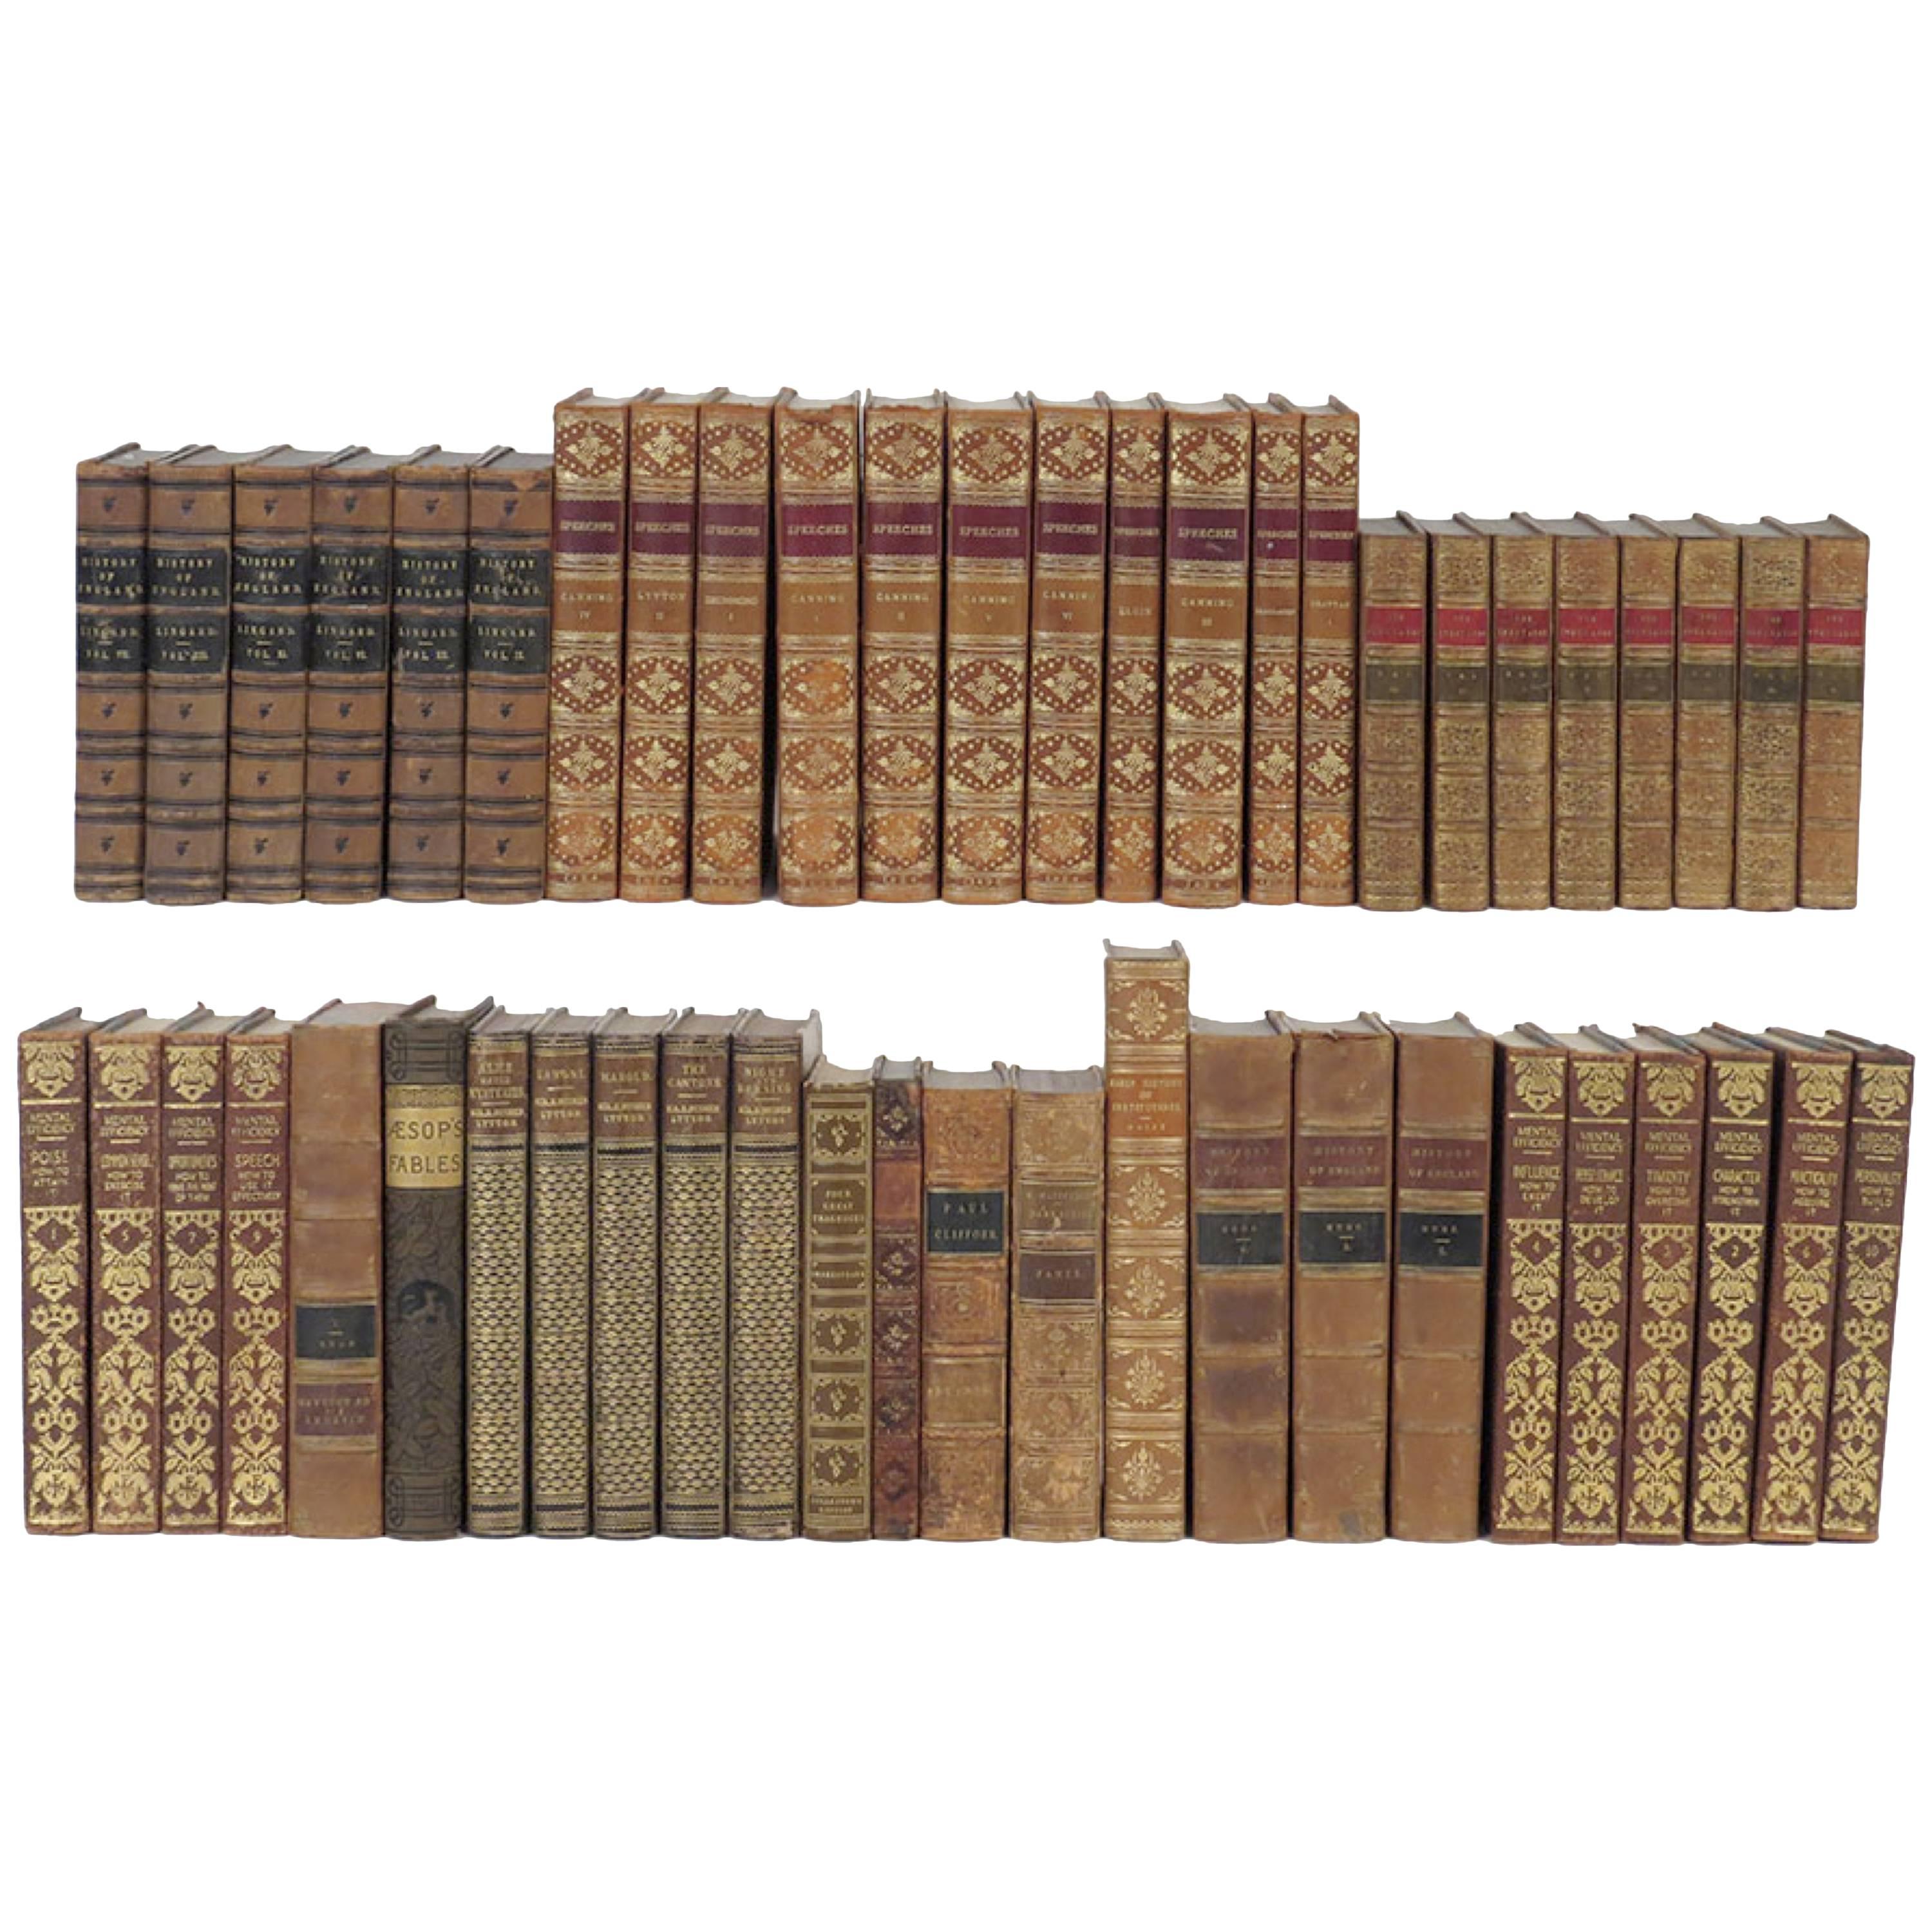 New Shipment Of Assorted Leather Bound Books, Priced Per Book. English